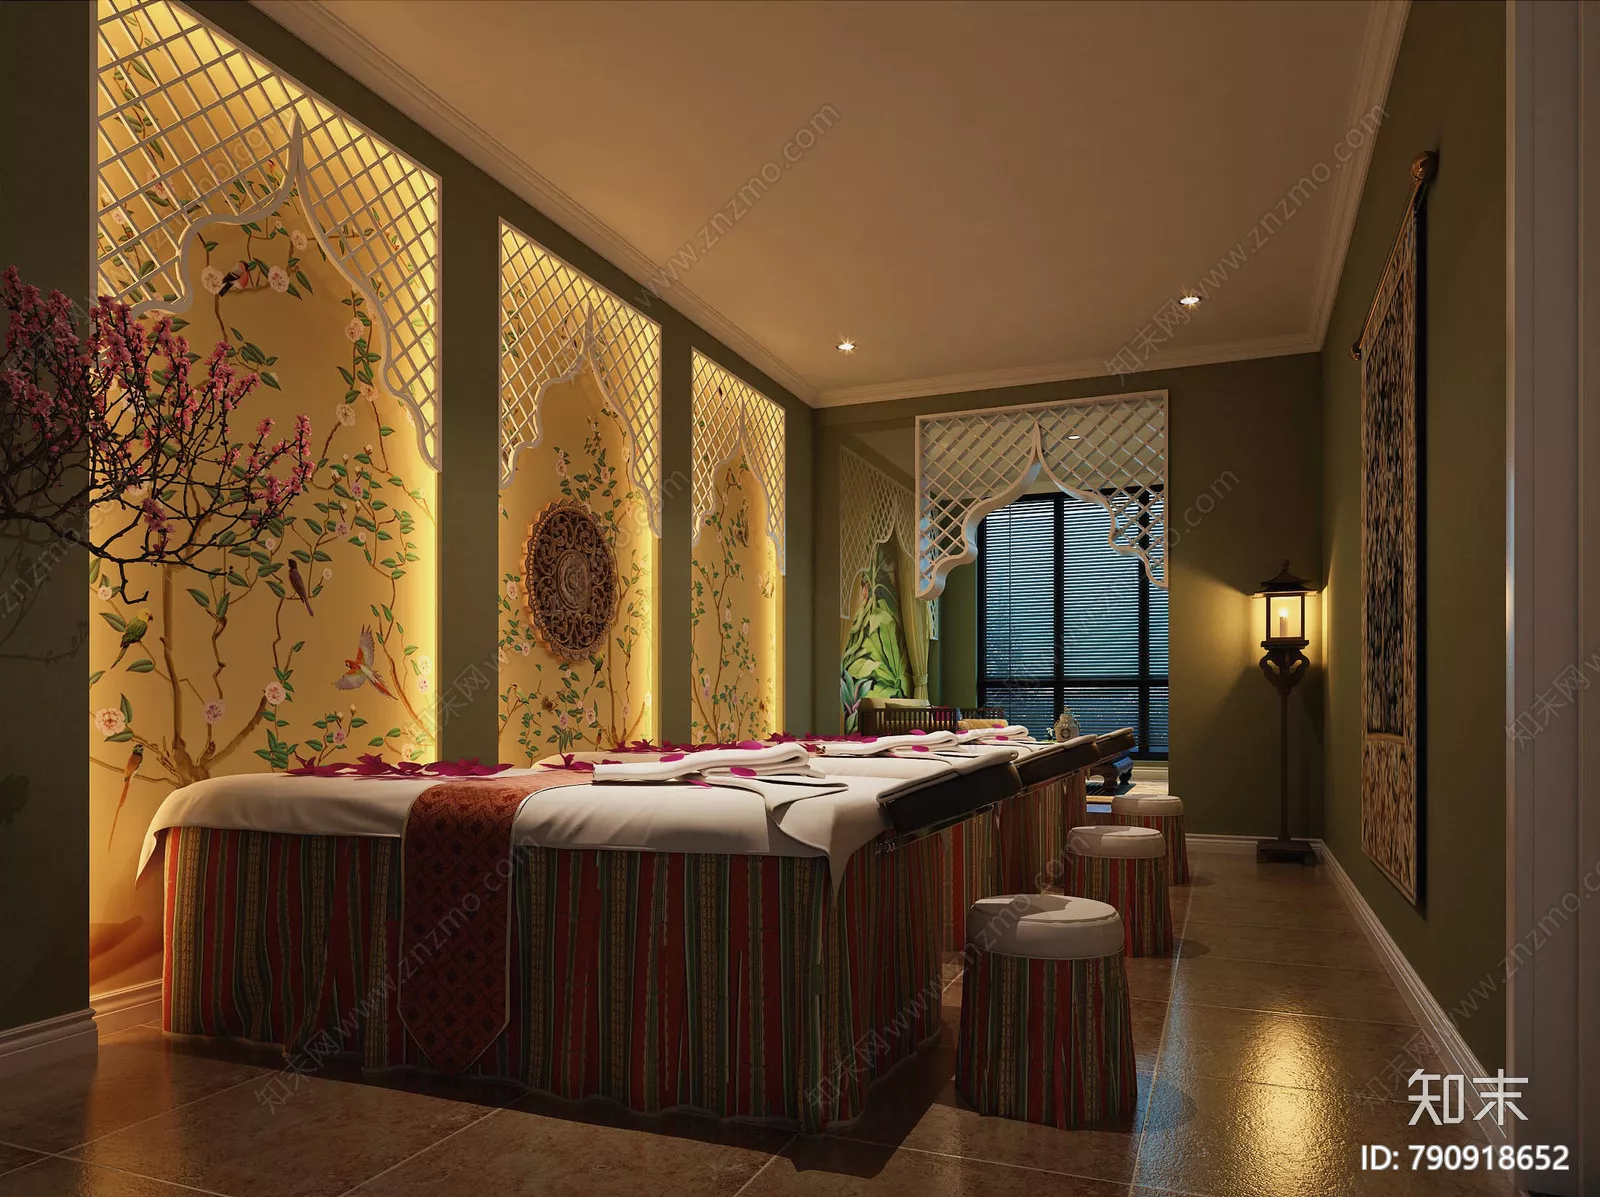 MODERN SPA AND BEAUTY - SKETCHUP 3D SCENE - VRAY OR ENSCAPE - ID13893